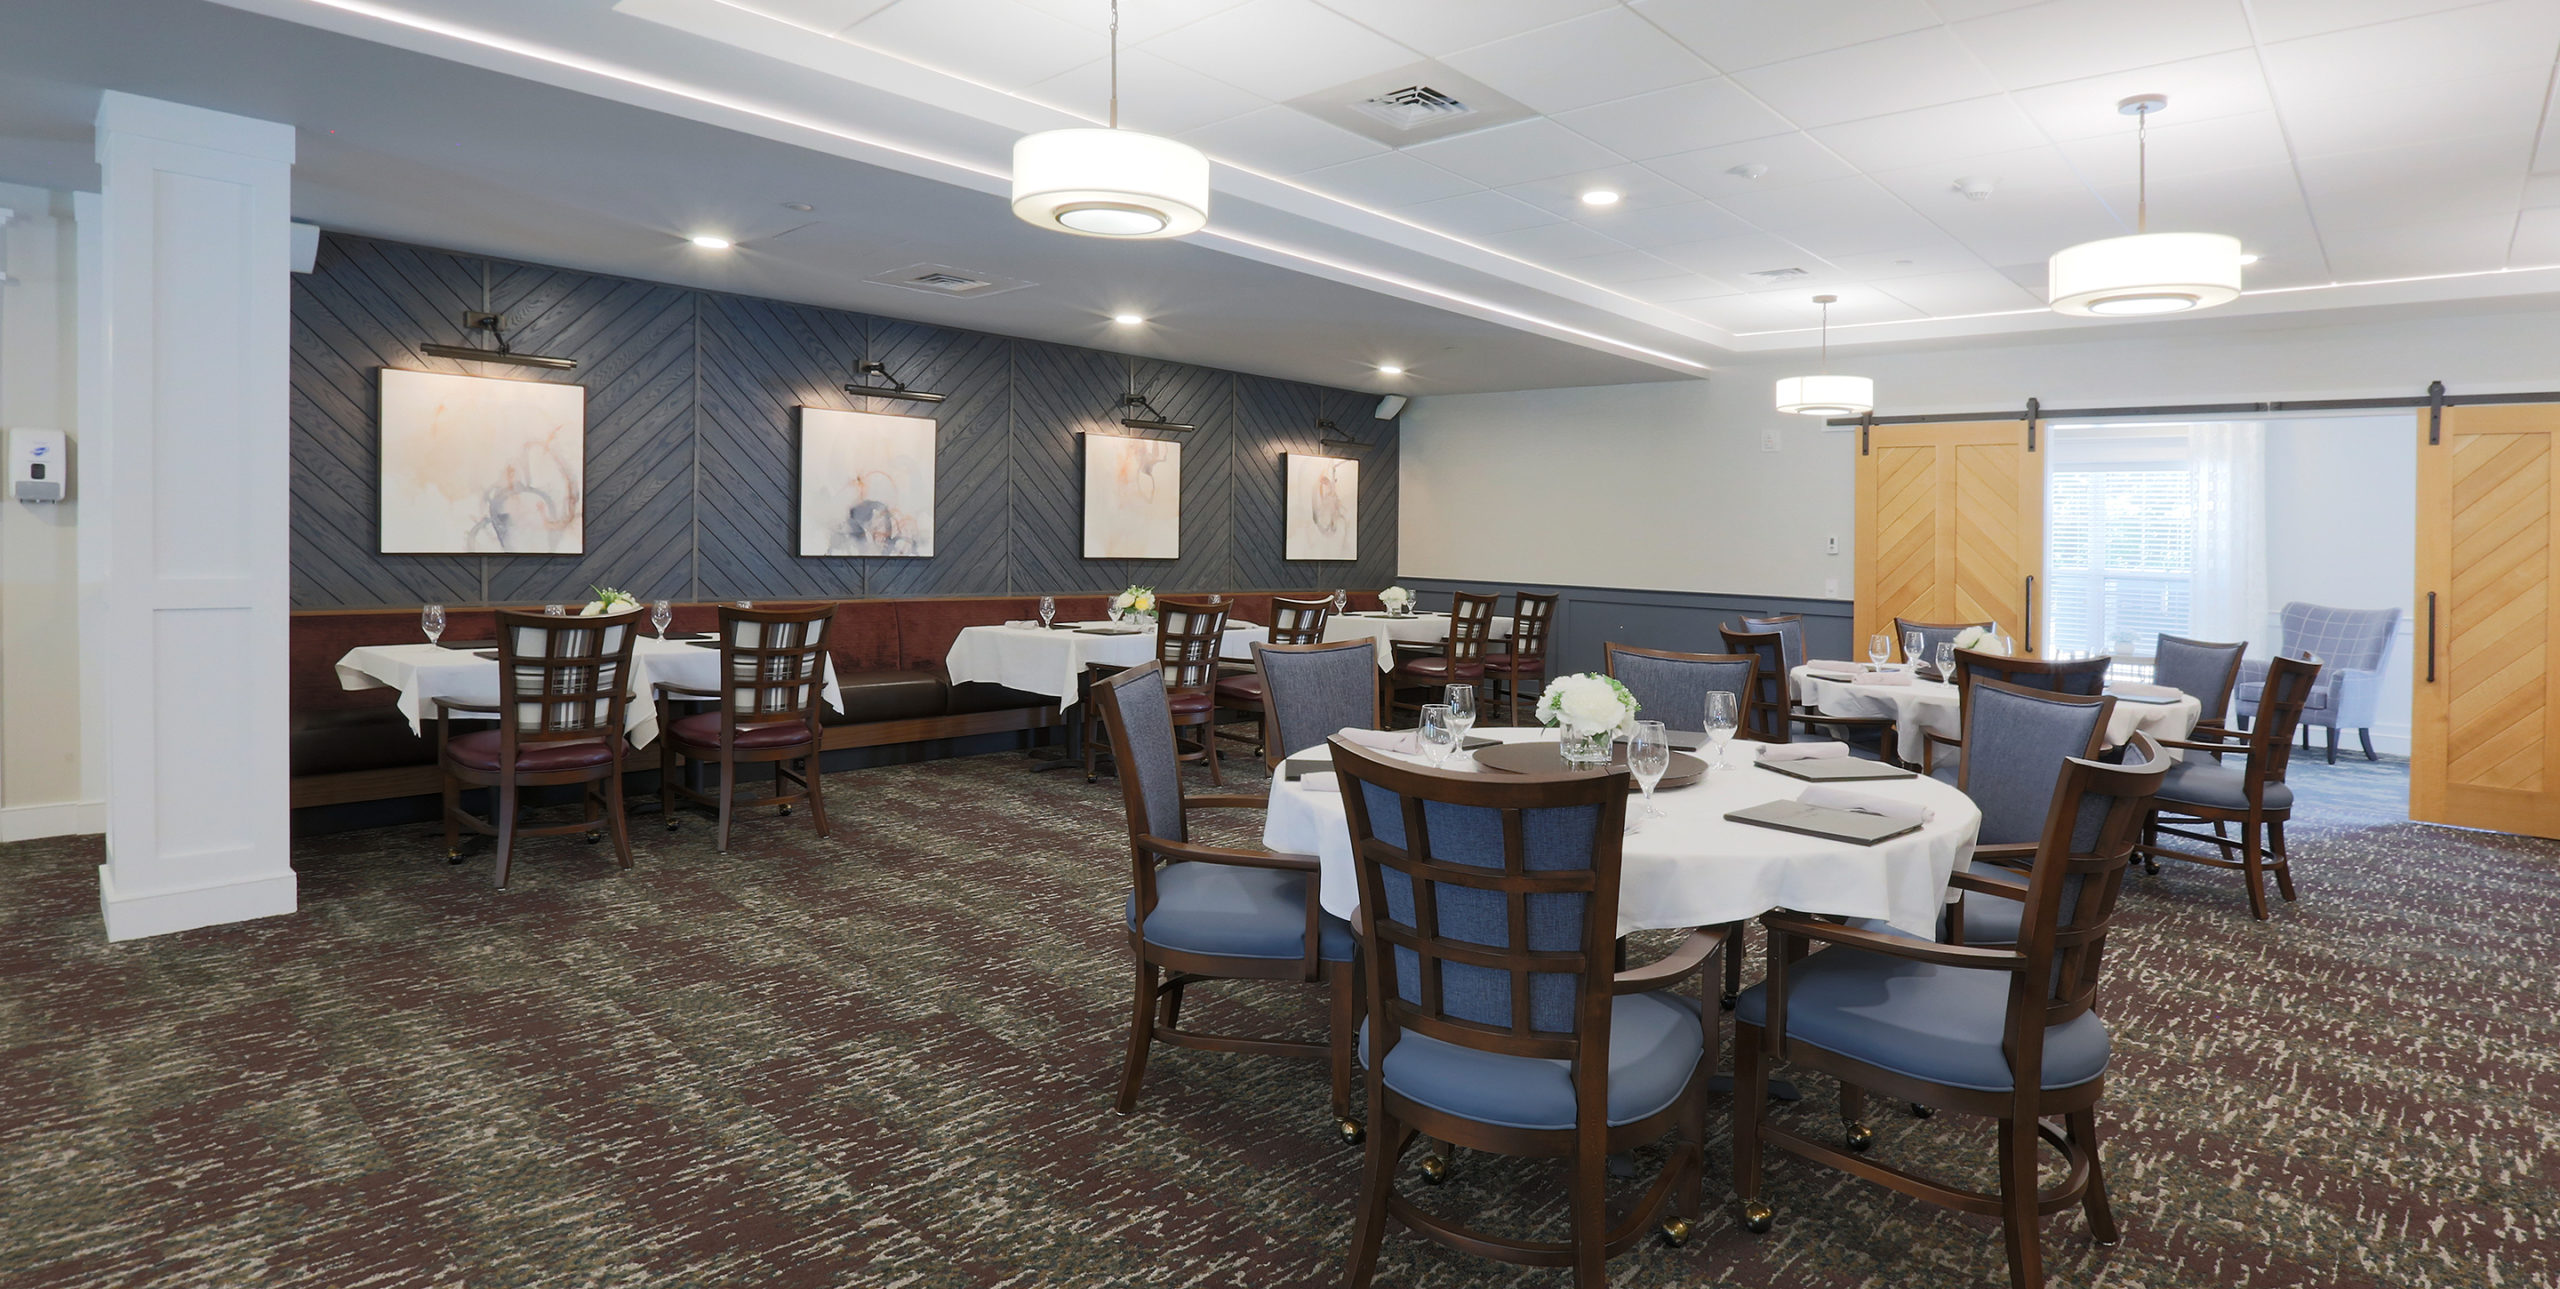 Dining room tables with six chairs at each table at Brightview Senior Living in Sayville, NY